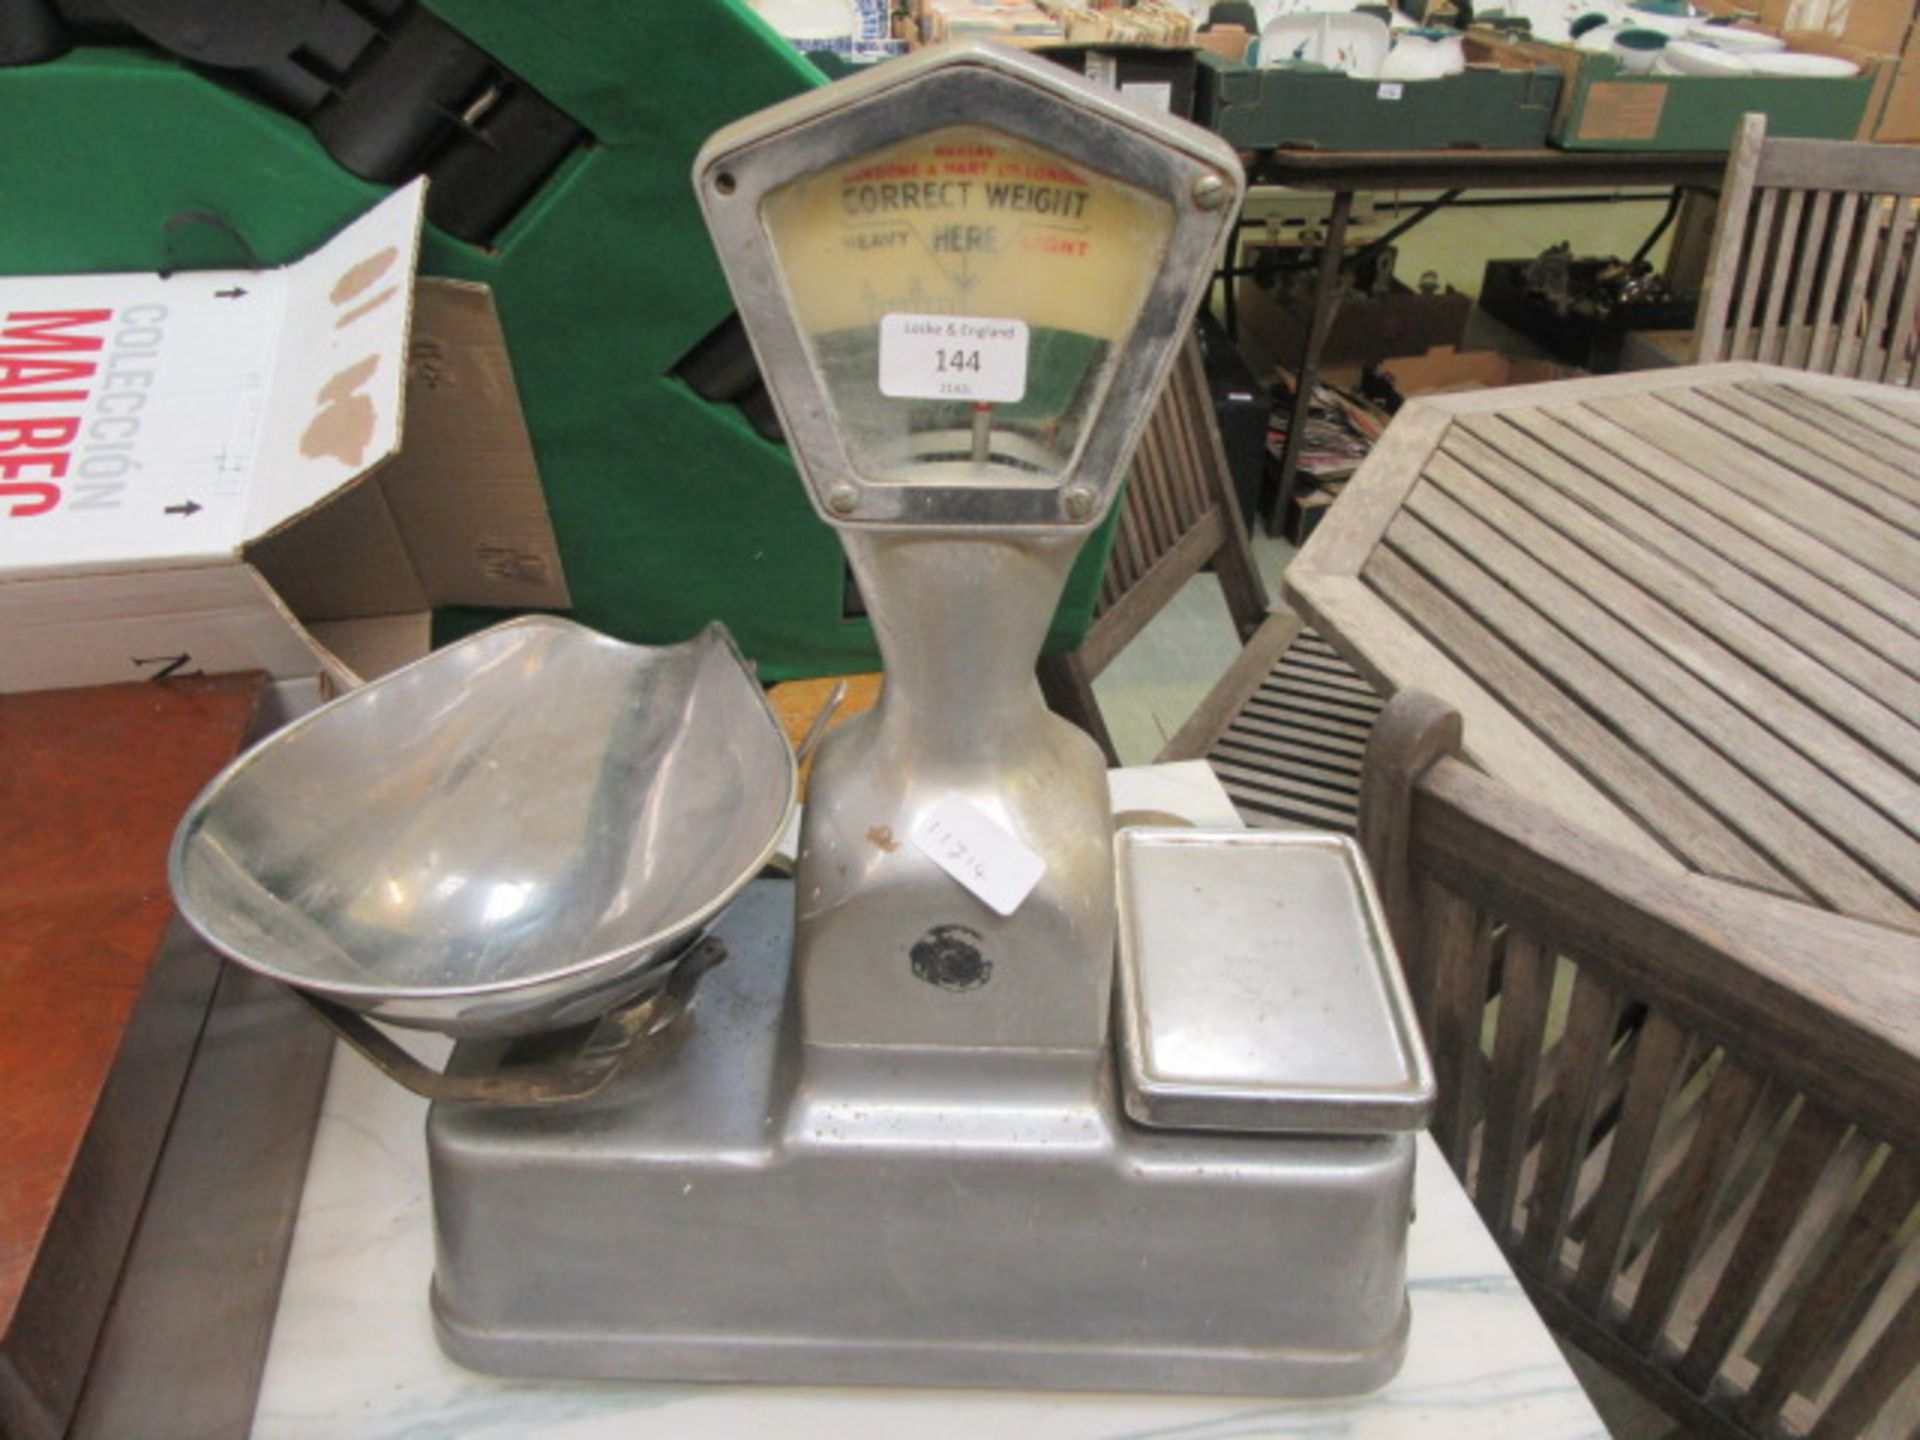 A set of mid-20th century shop scales